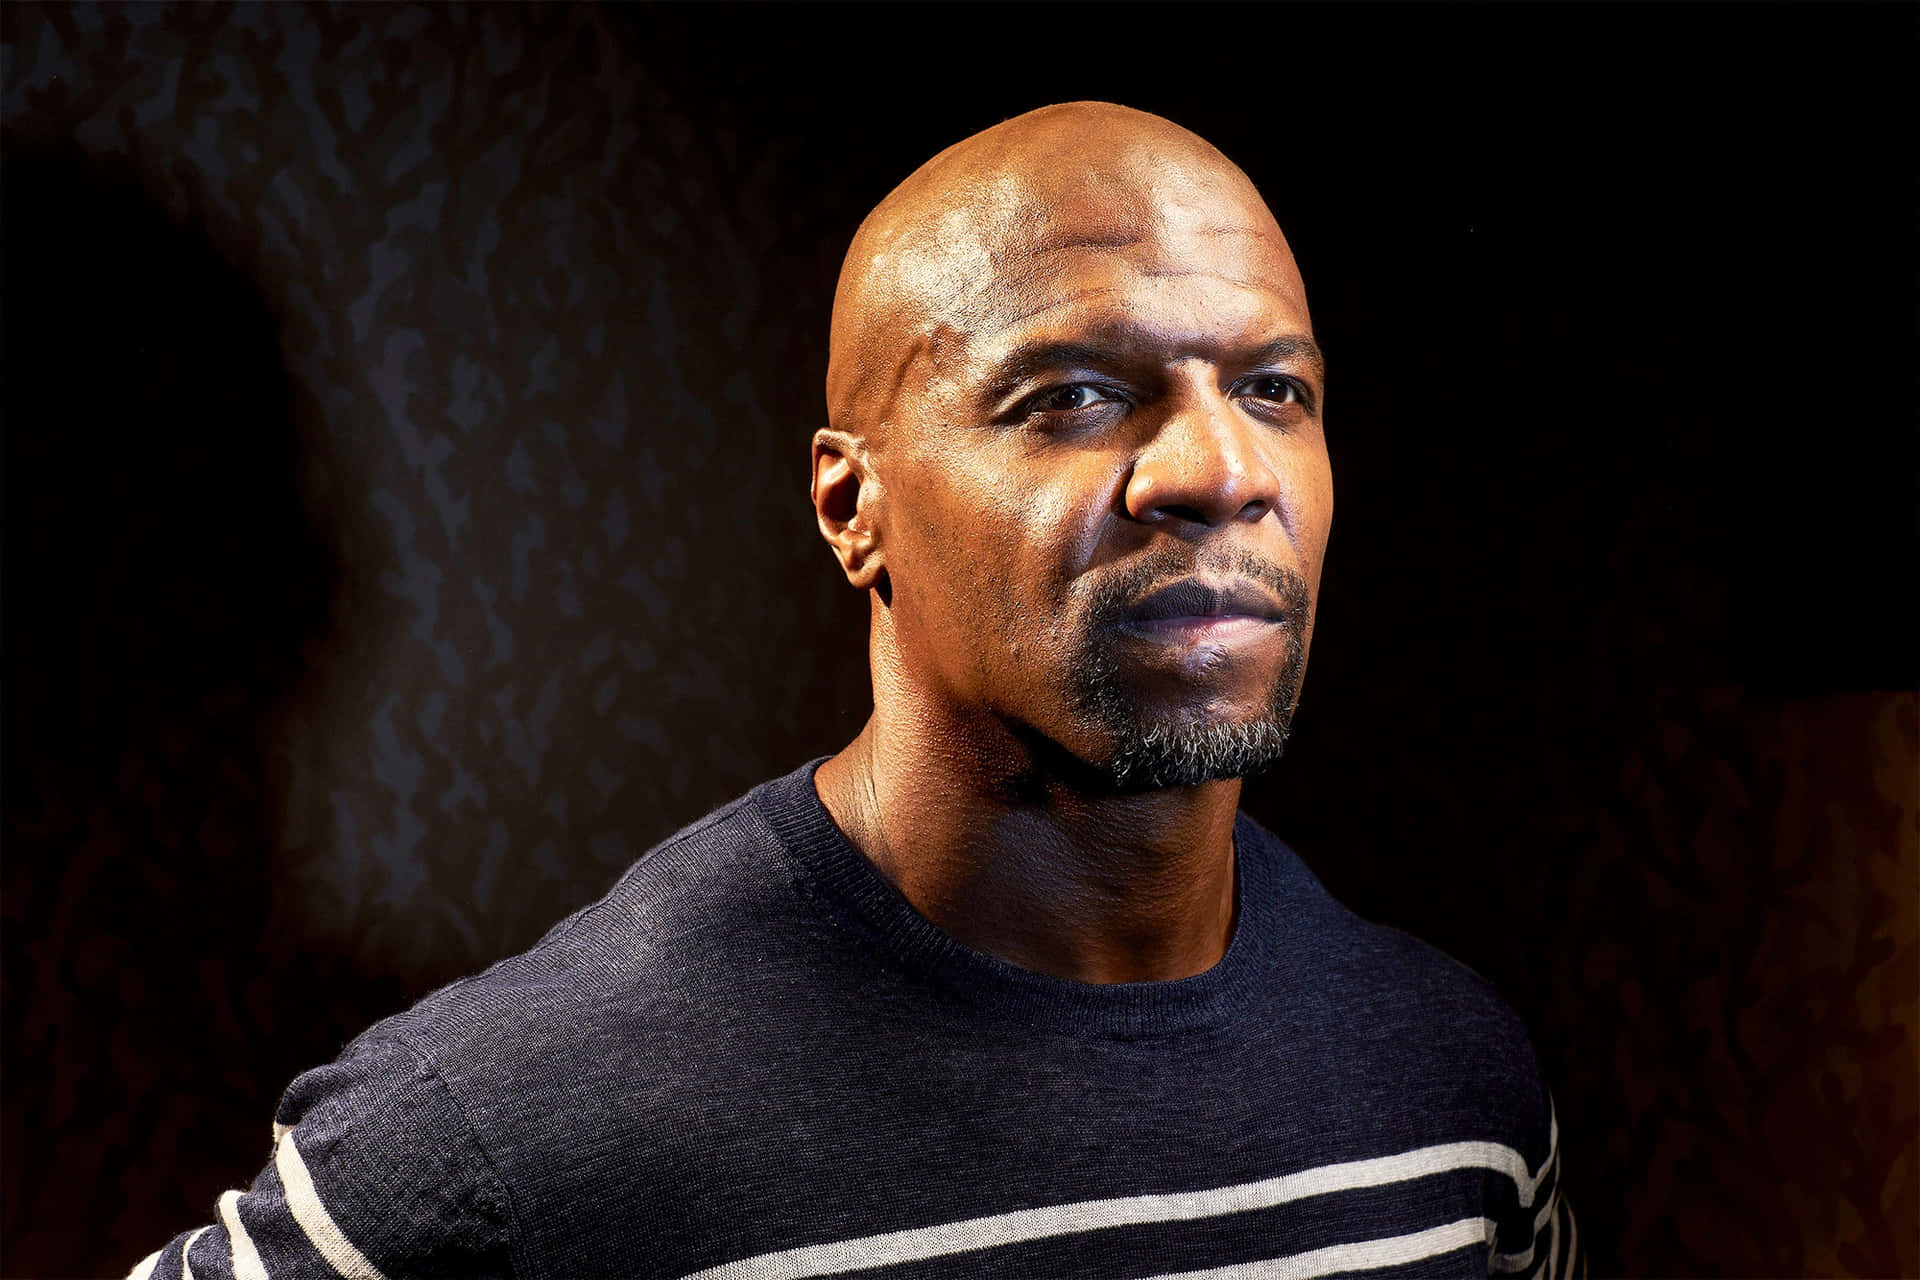 Actor and former NFL player Terry Crews. Wallpaper